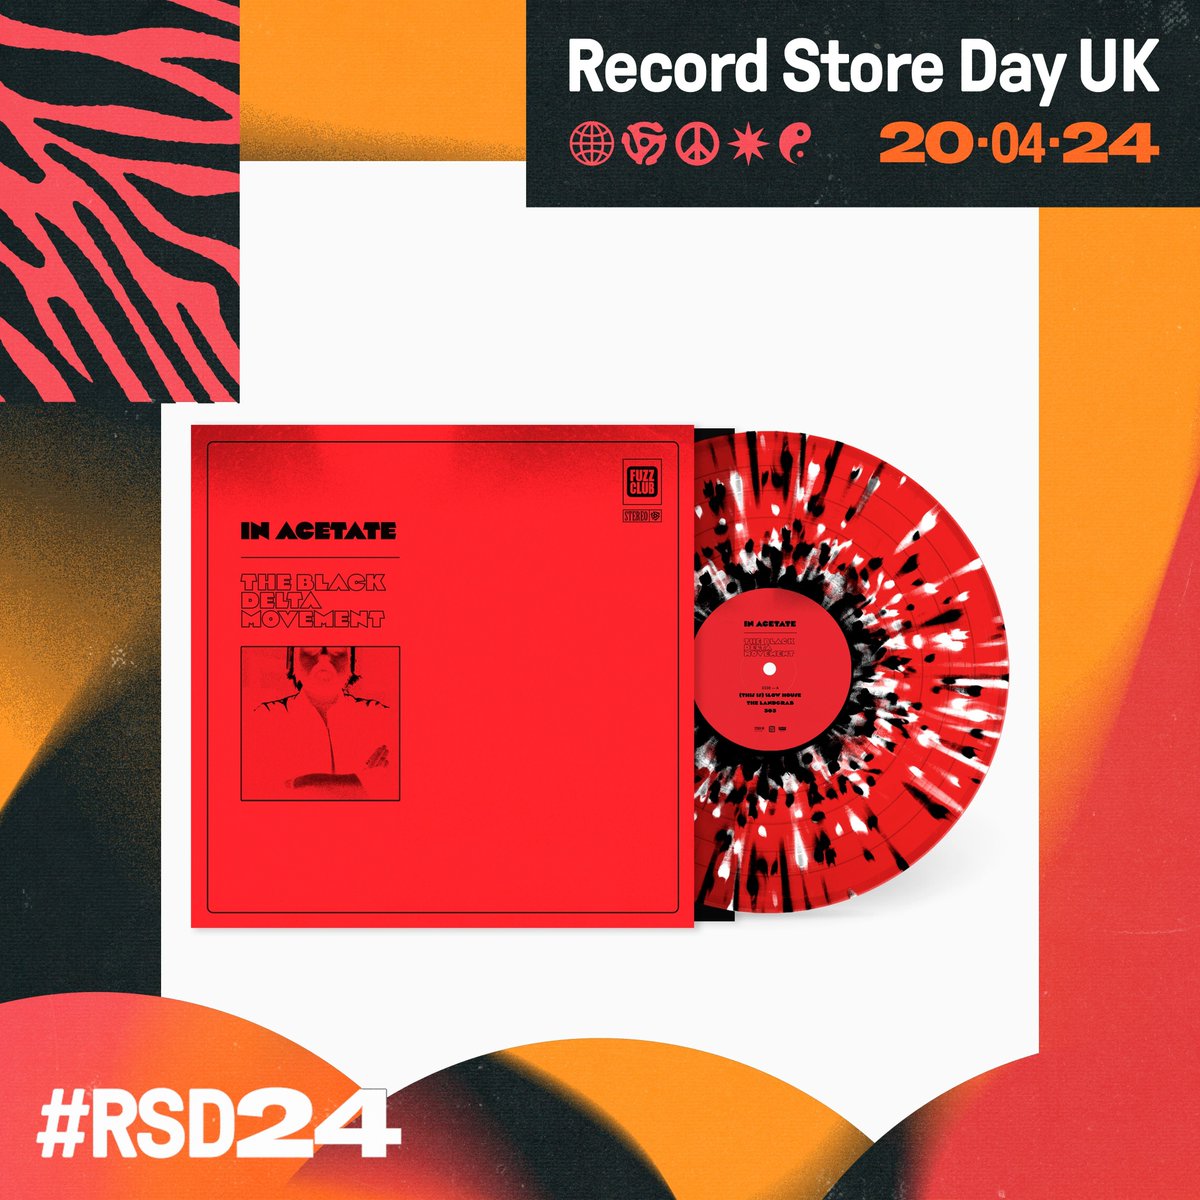 Who's ready for Record Store Day tomorrow?! 🙏🏻 We have three very limited releases from The Men, The Telescopes (@kickthewall) and The Black Delta Movement (@BDMOfficial) available in participating stores! recordstoreday.co.uk/store-locator/ @RSDUK